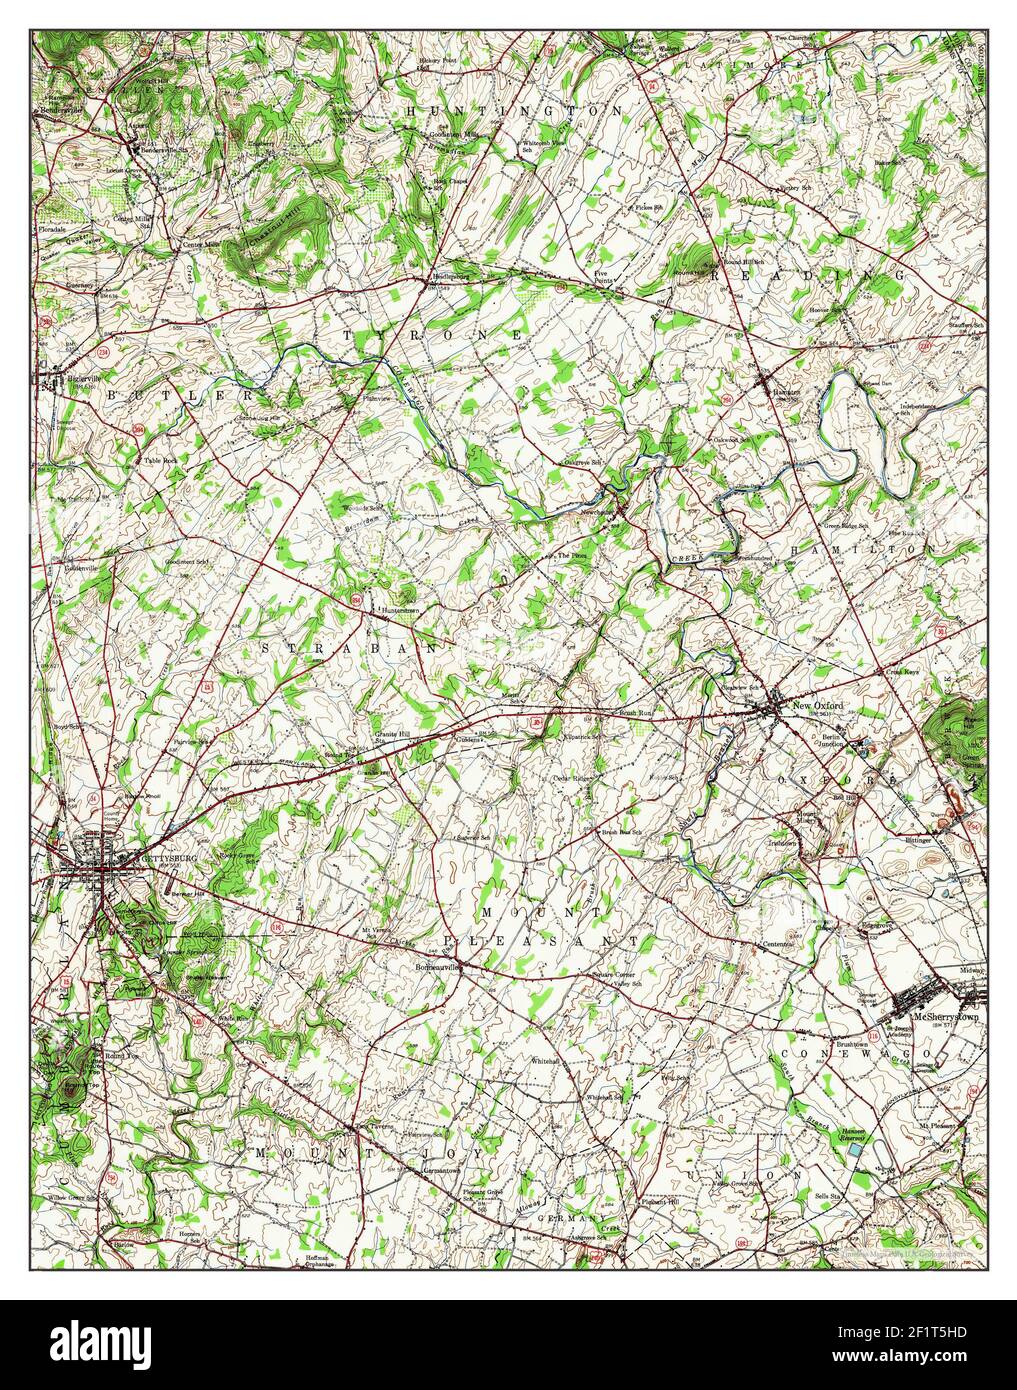 Gettysburg, Pennsylvania, map 1951, 1:62500, United States of America by Timeless Maps, data U.S. Geological Survey Stock Photo